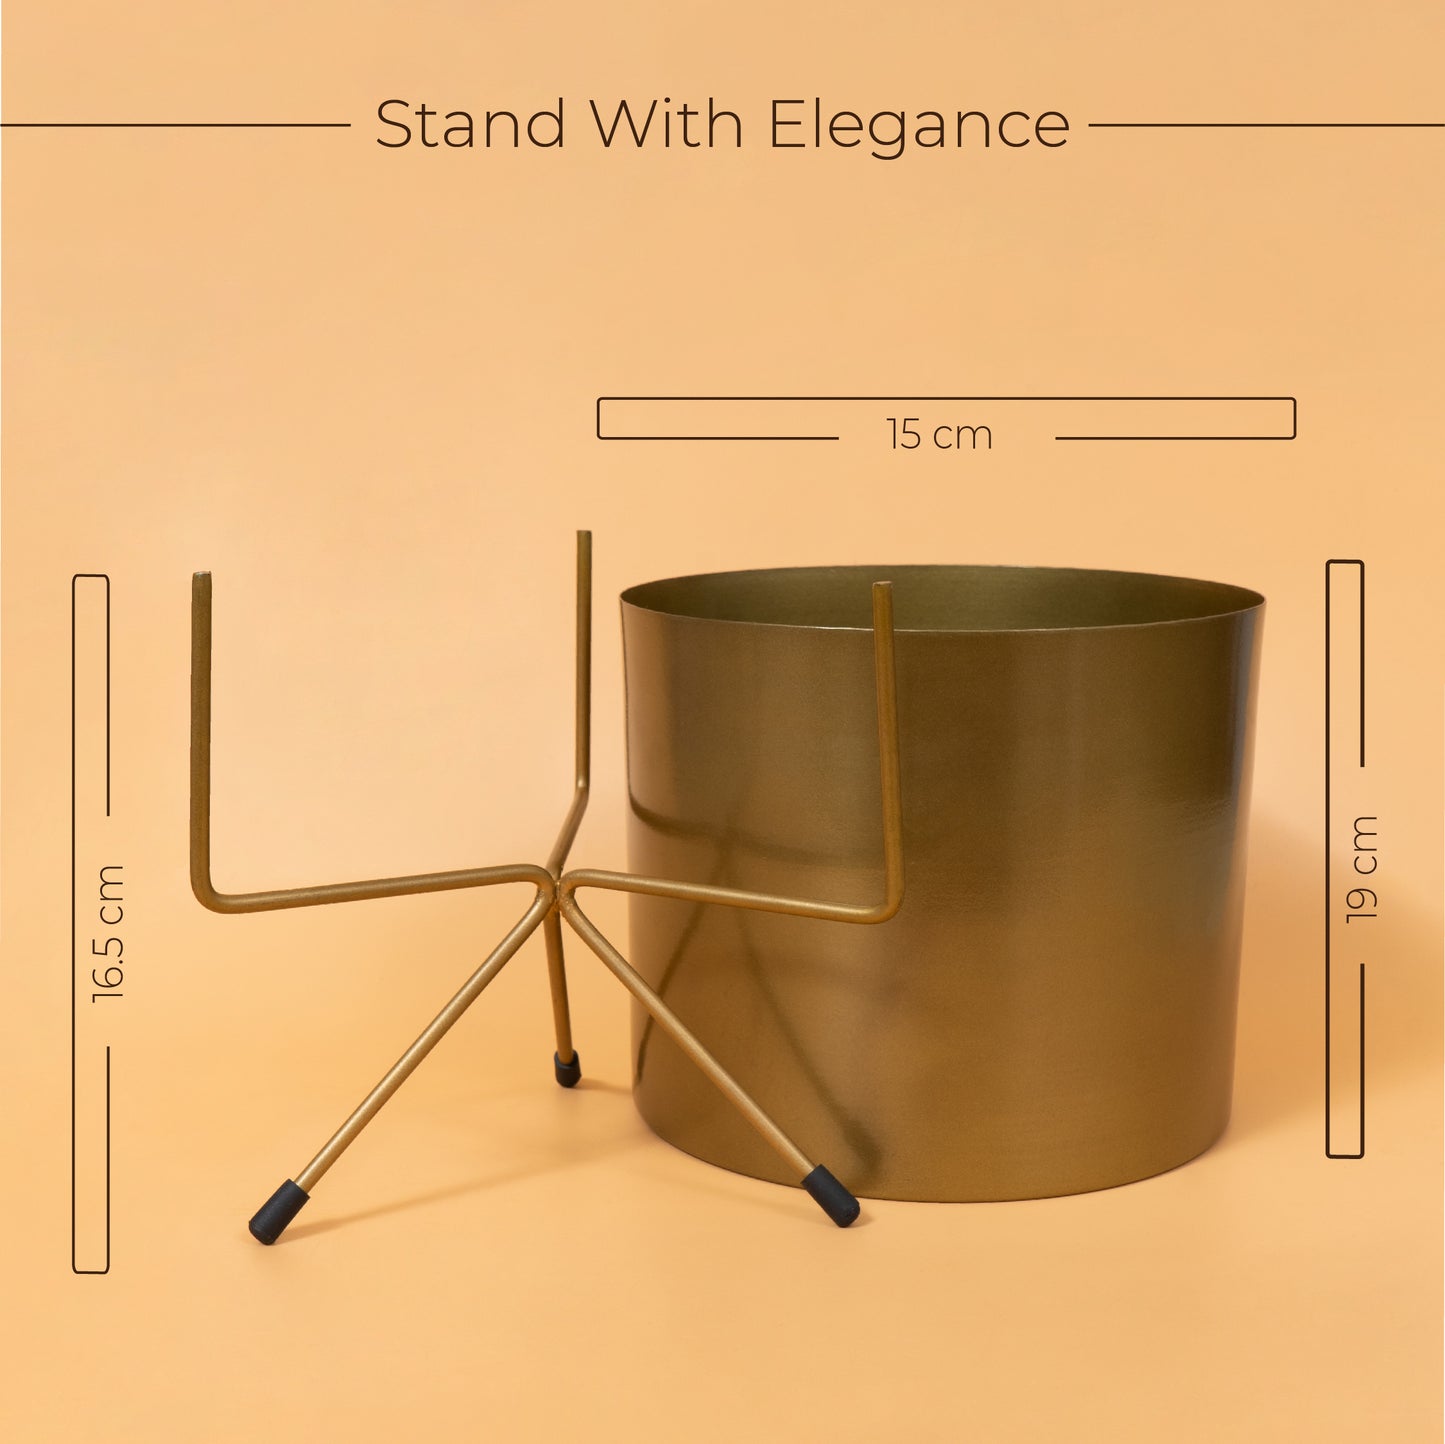 Gold Finish Cylindrical Iron Pot With Stand